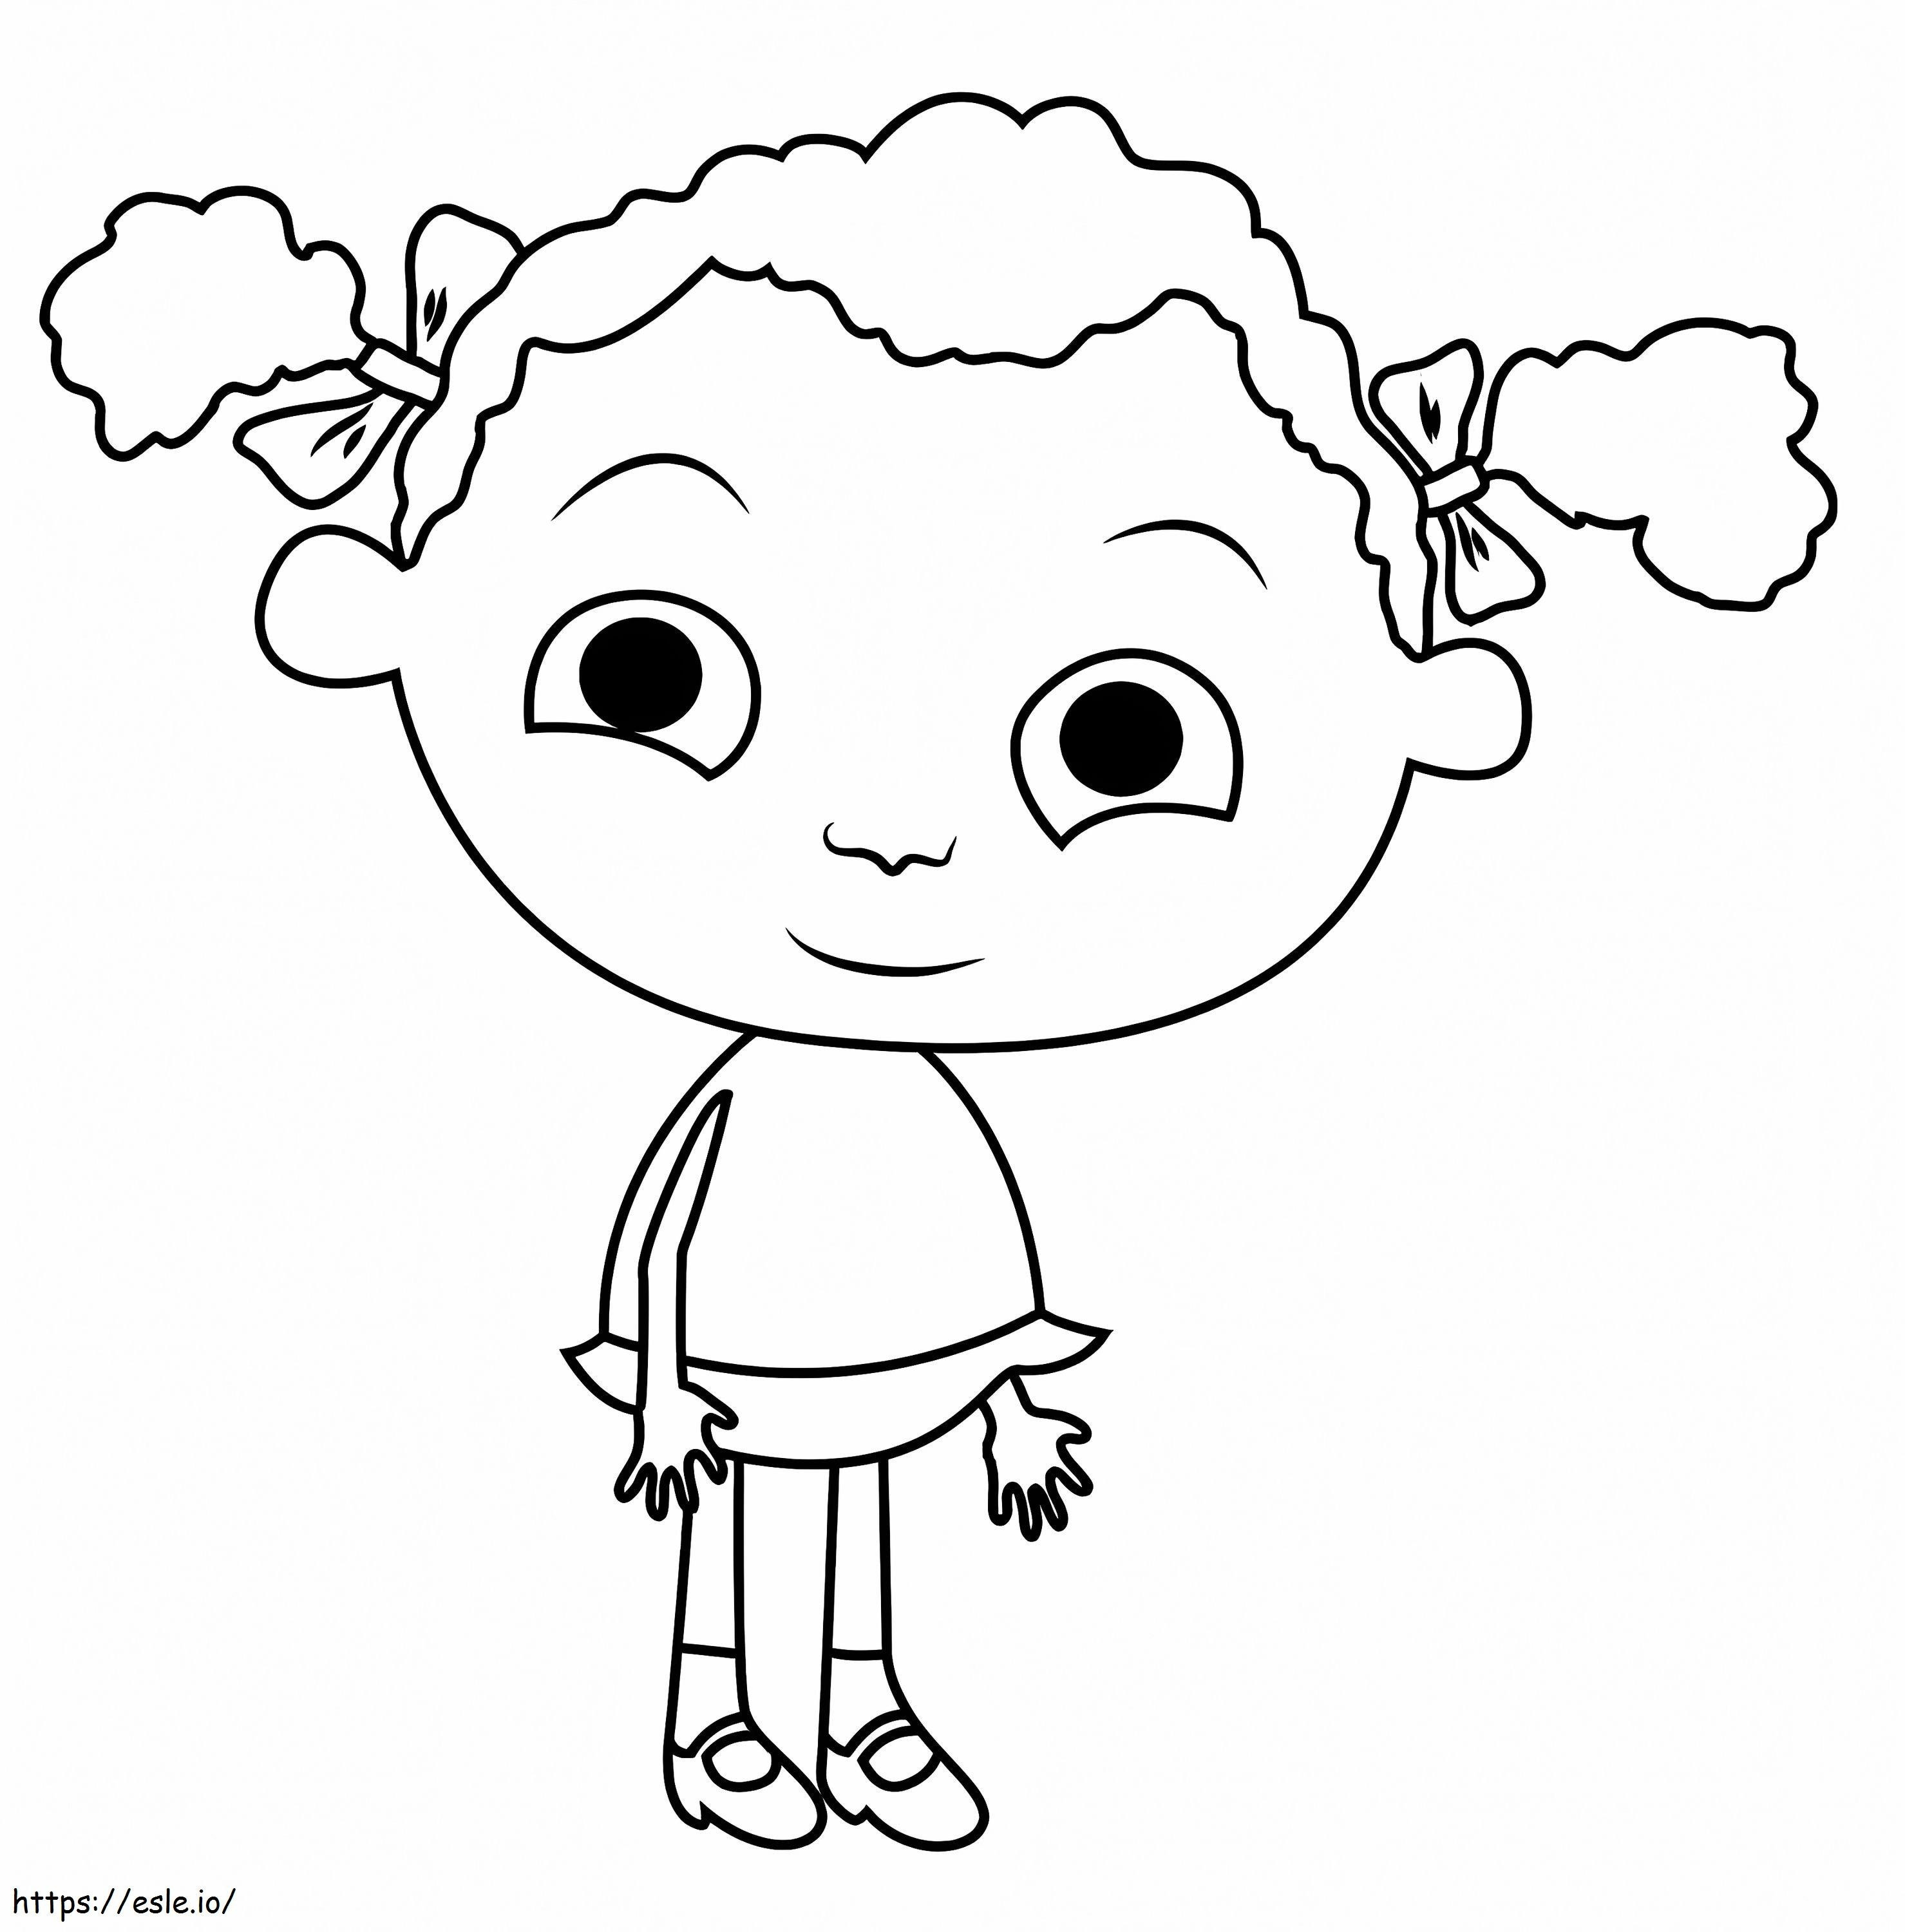 Cute Franny coloring page